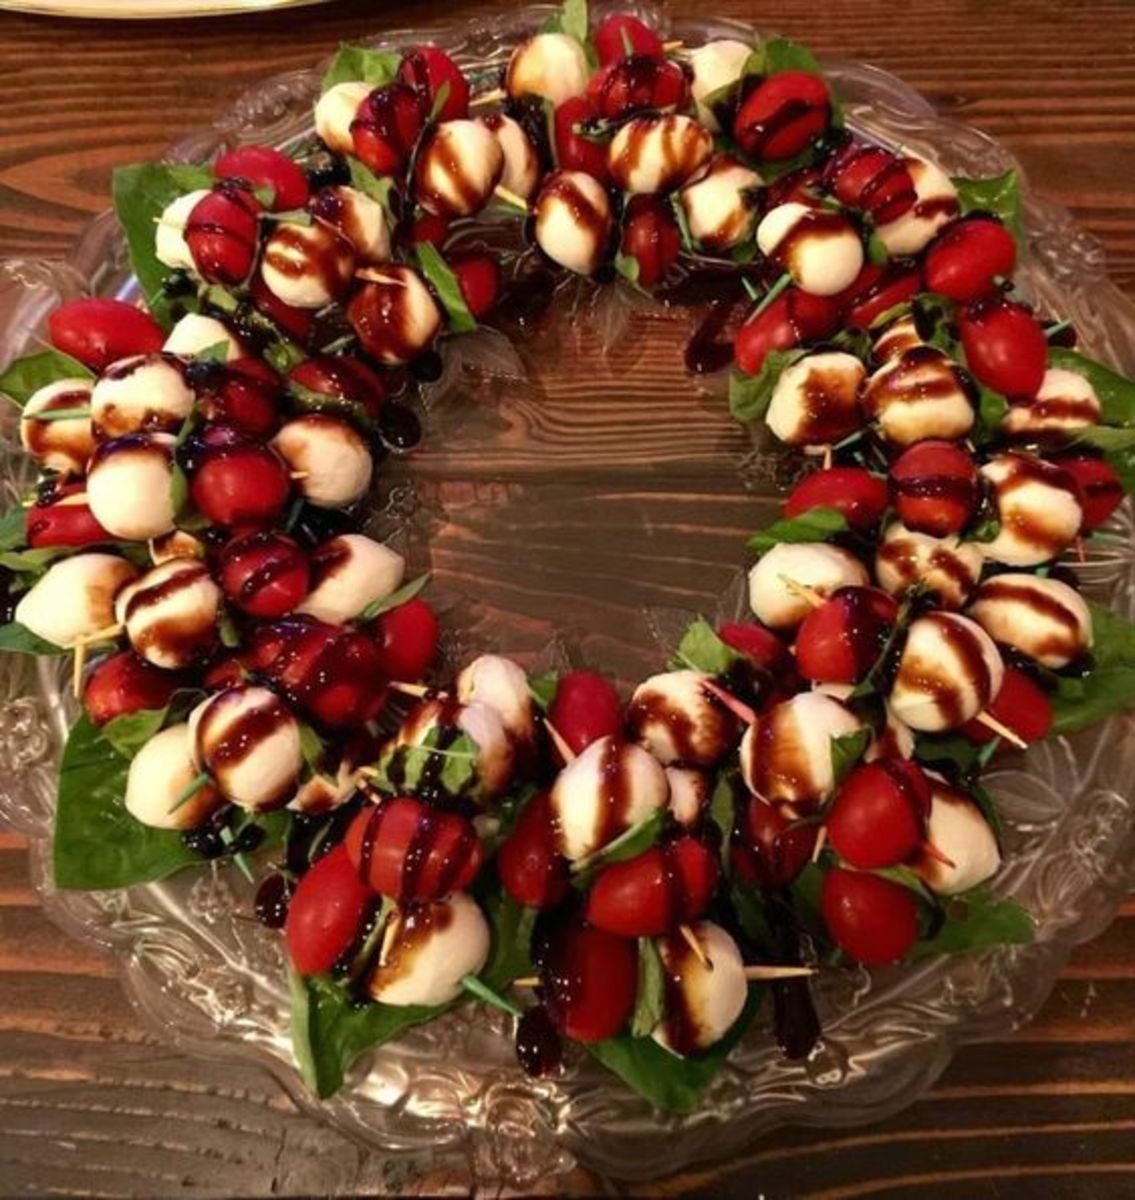 Wreath platter with tomatoes, mozzarella, and basil